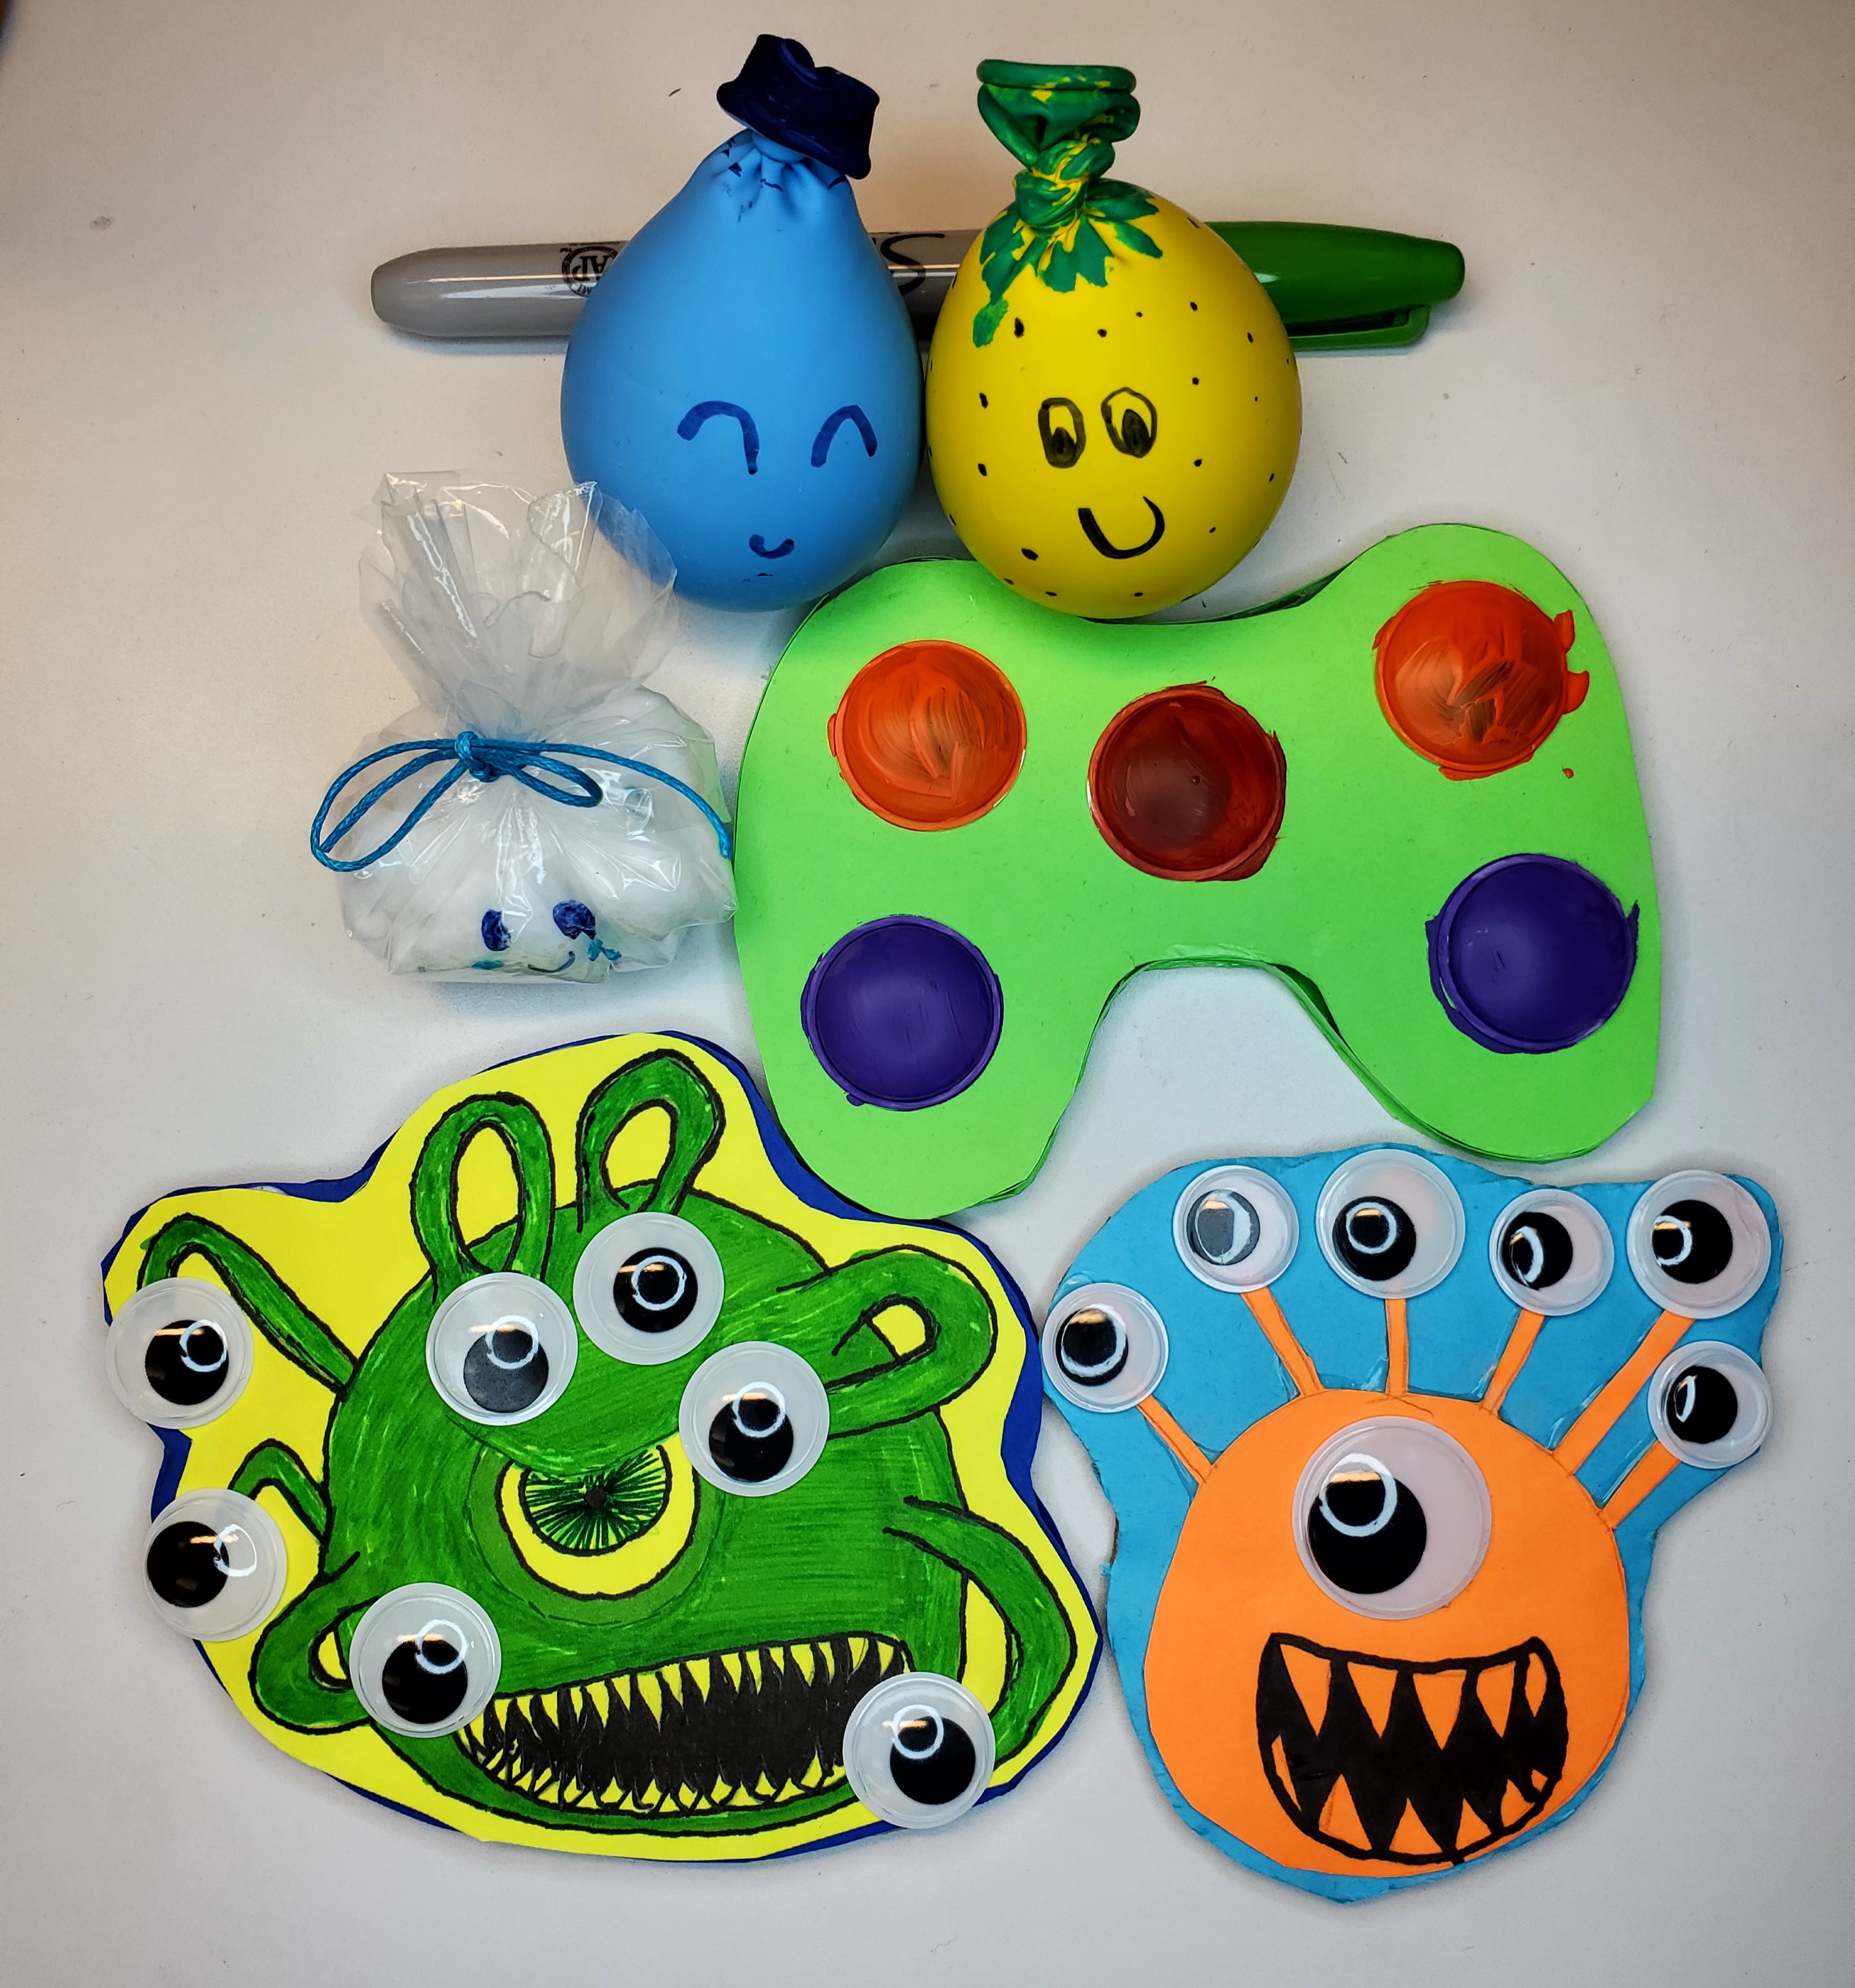 Six fidget toys: a colorful videogame controller pop-it, a cute beholder pop-it, a scary beholder pop-it, a cloud squishy, and two slime balloon squishies